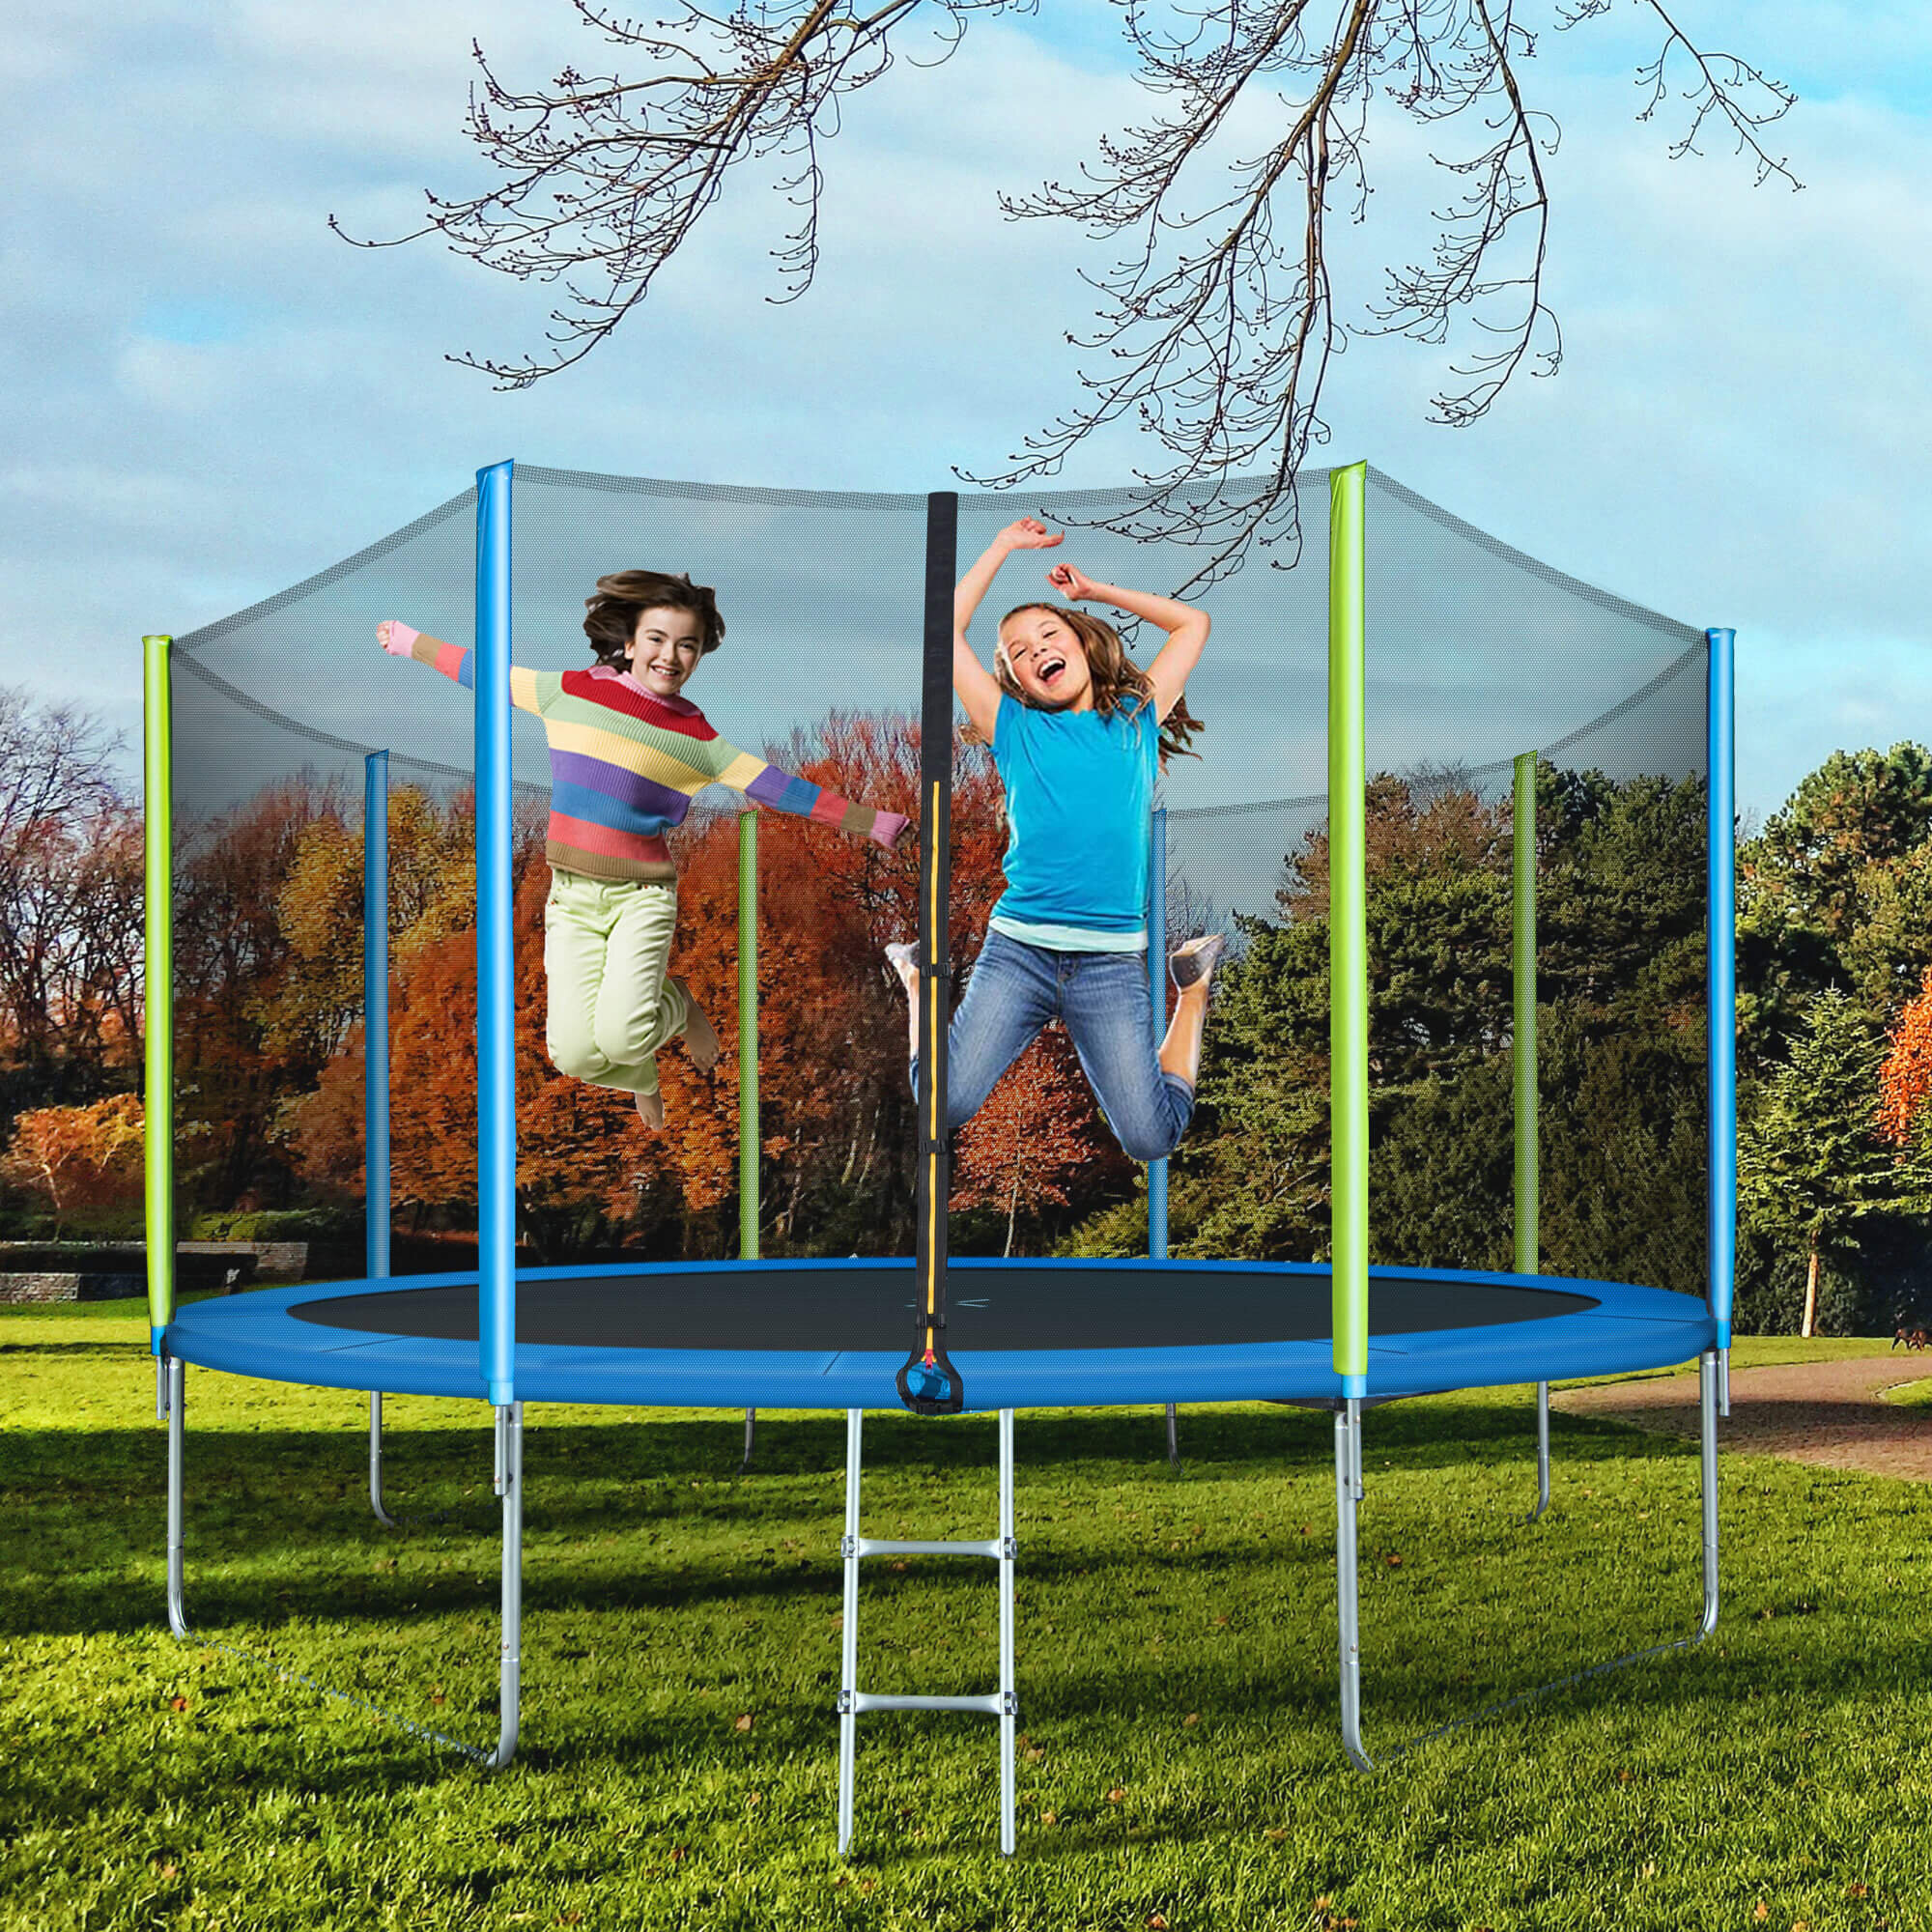 JRBER Upgraded 14Ft Trampoline For Kids With Safety Enclosure Ladder And 8 Wind Stakes, Outdoor Recreational Trampoline，Combo Bounce Outdoor Trampoline For Kids Family Time | Wayfair